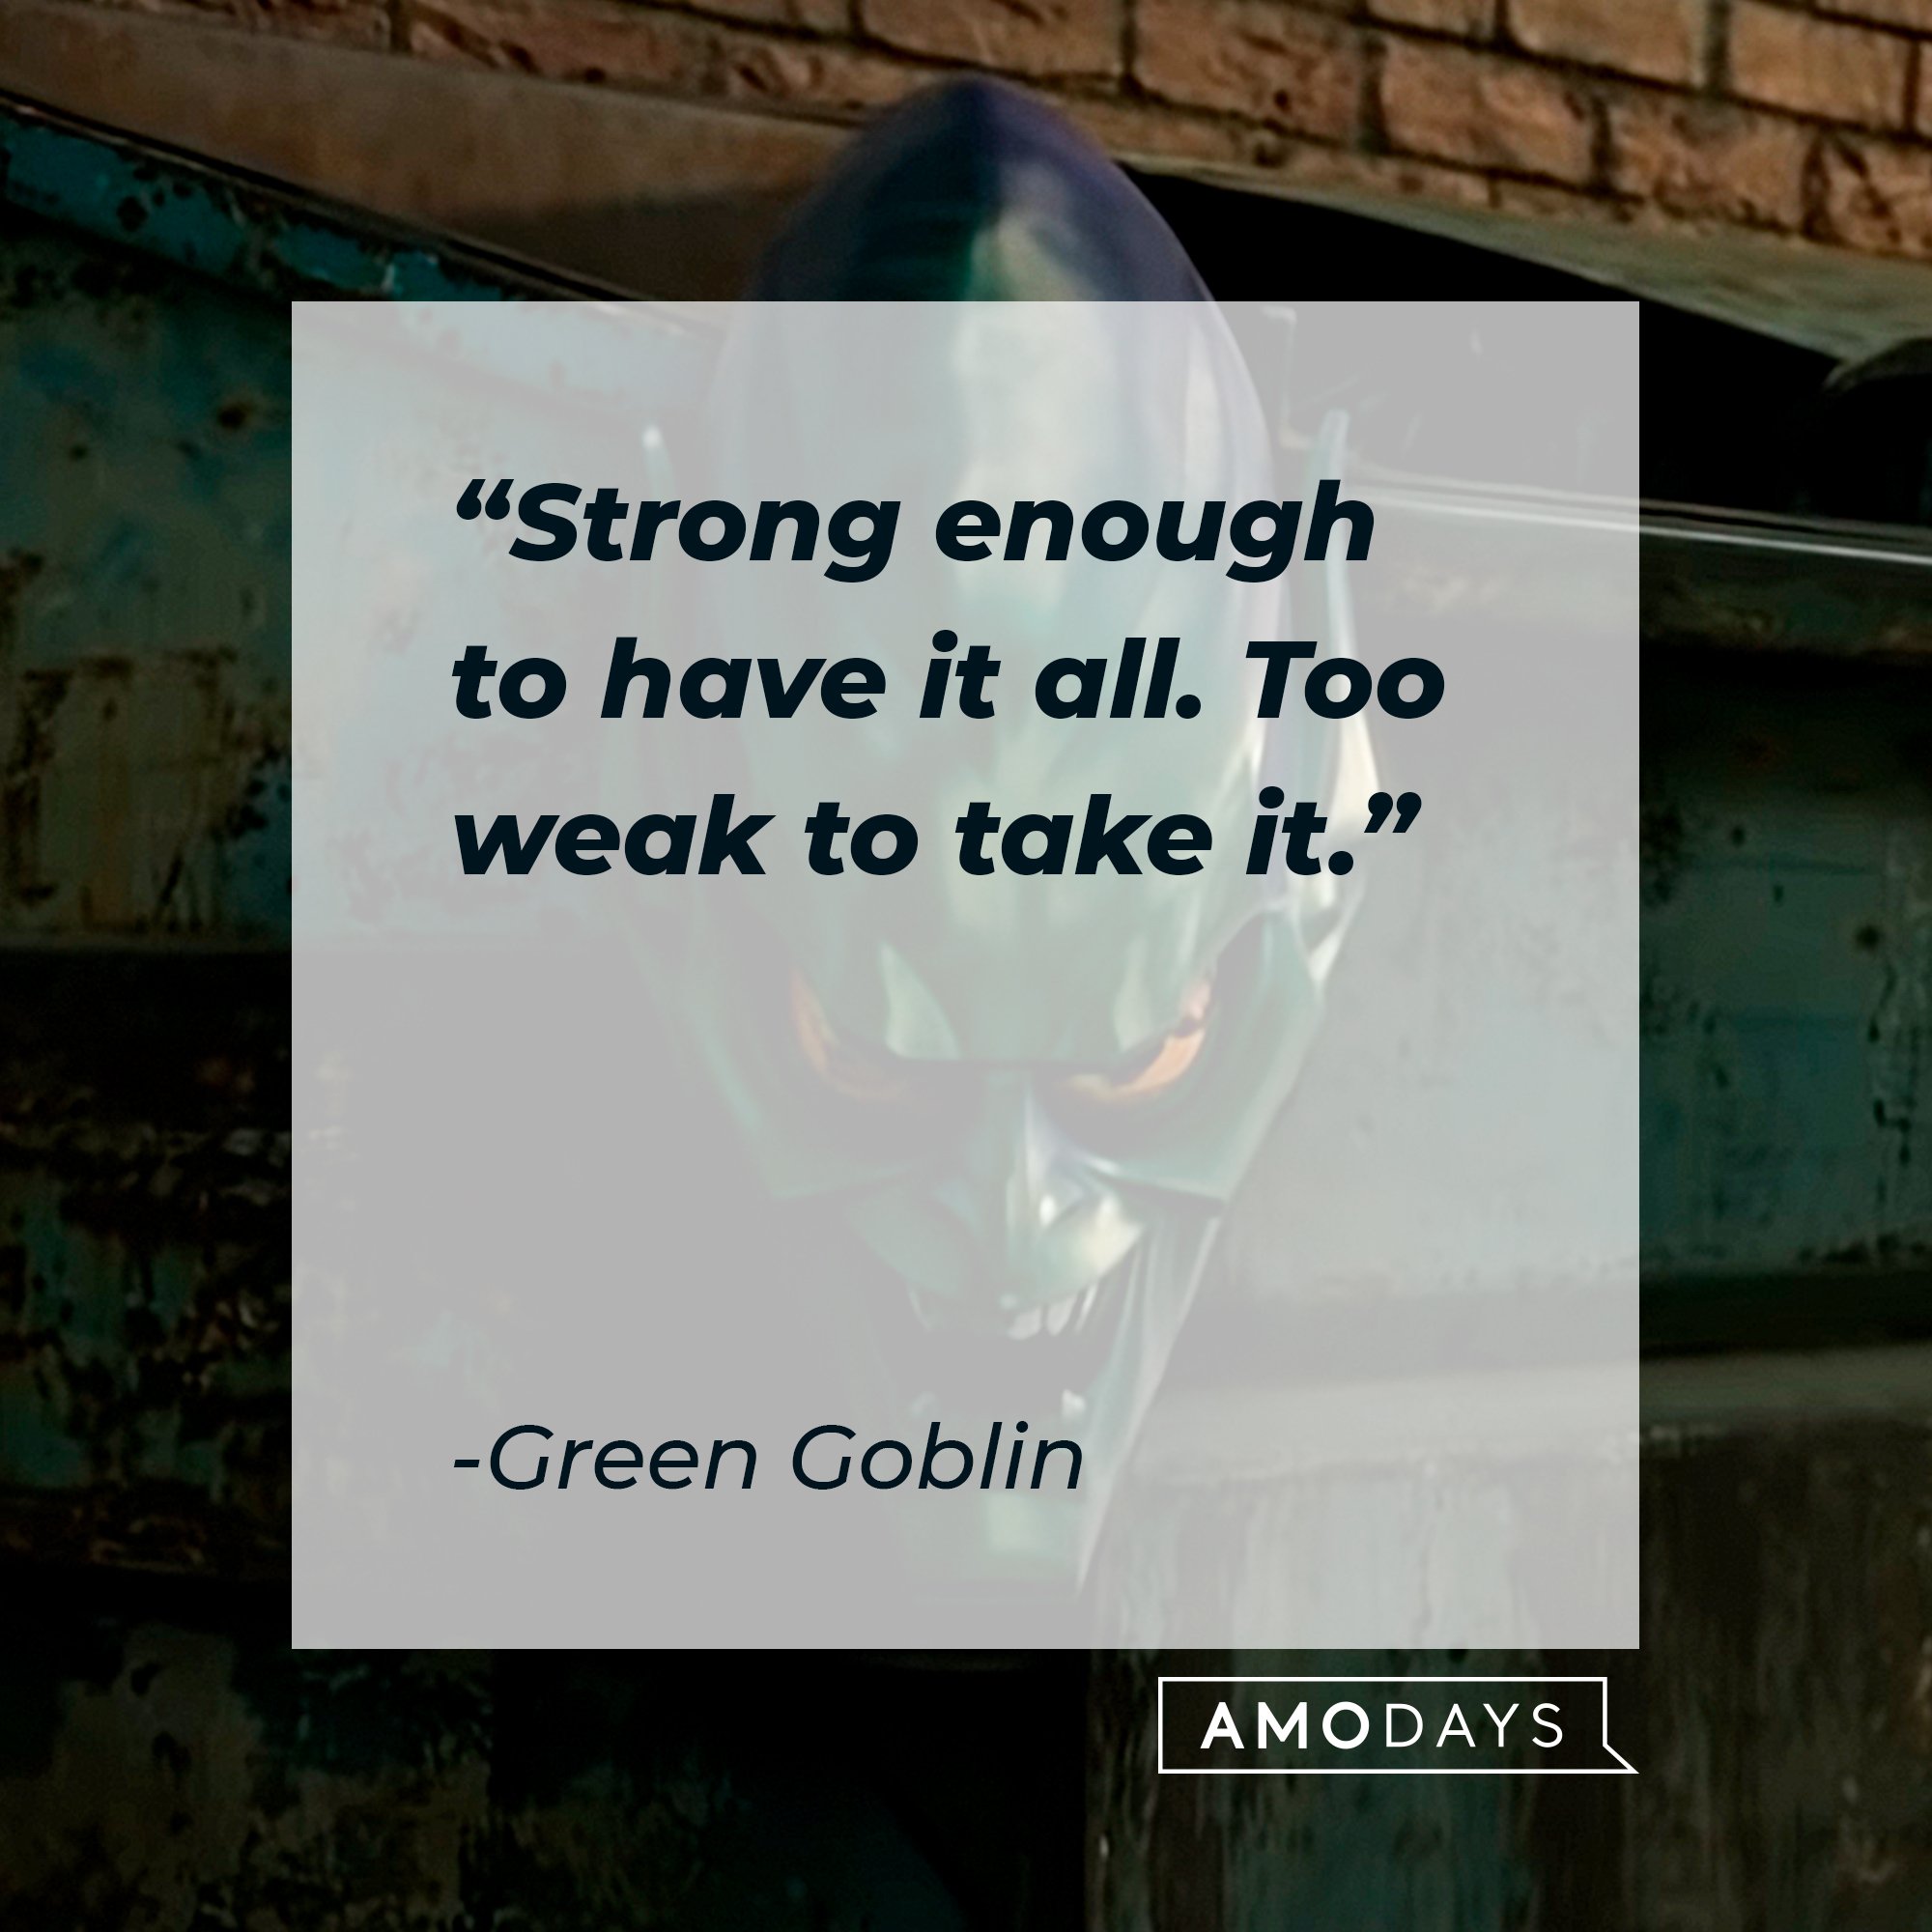 Green Goblin’s quote: “Strong enough to have it all. Too weak to take it.” | Image: AmoDays